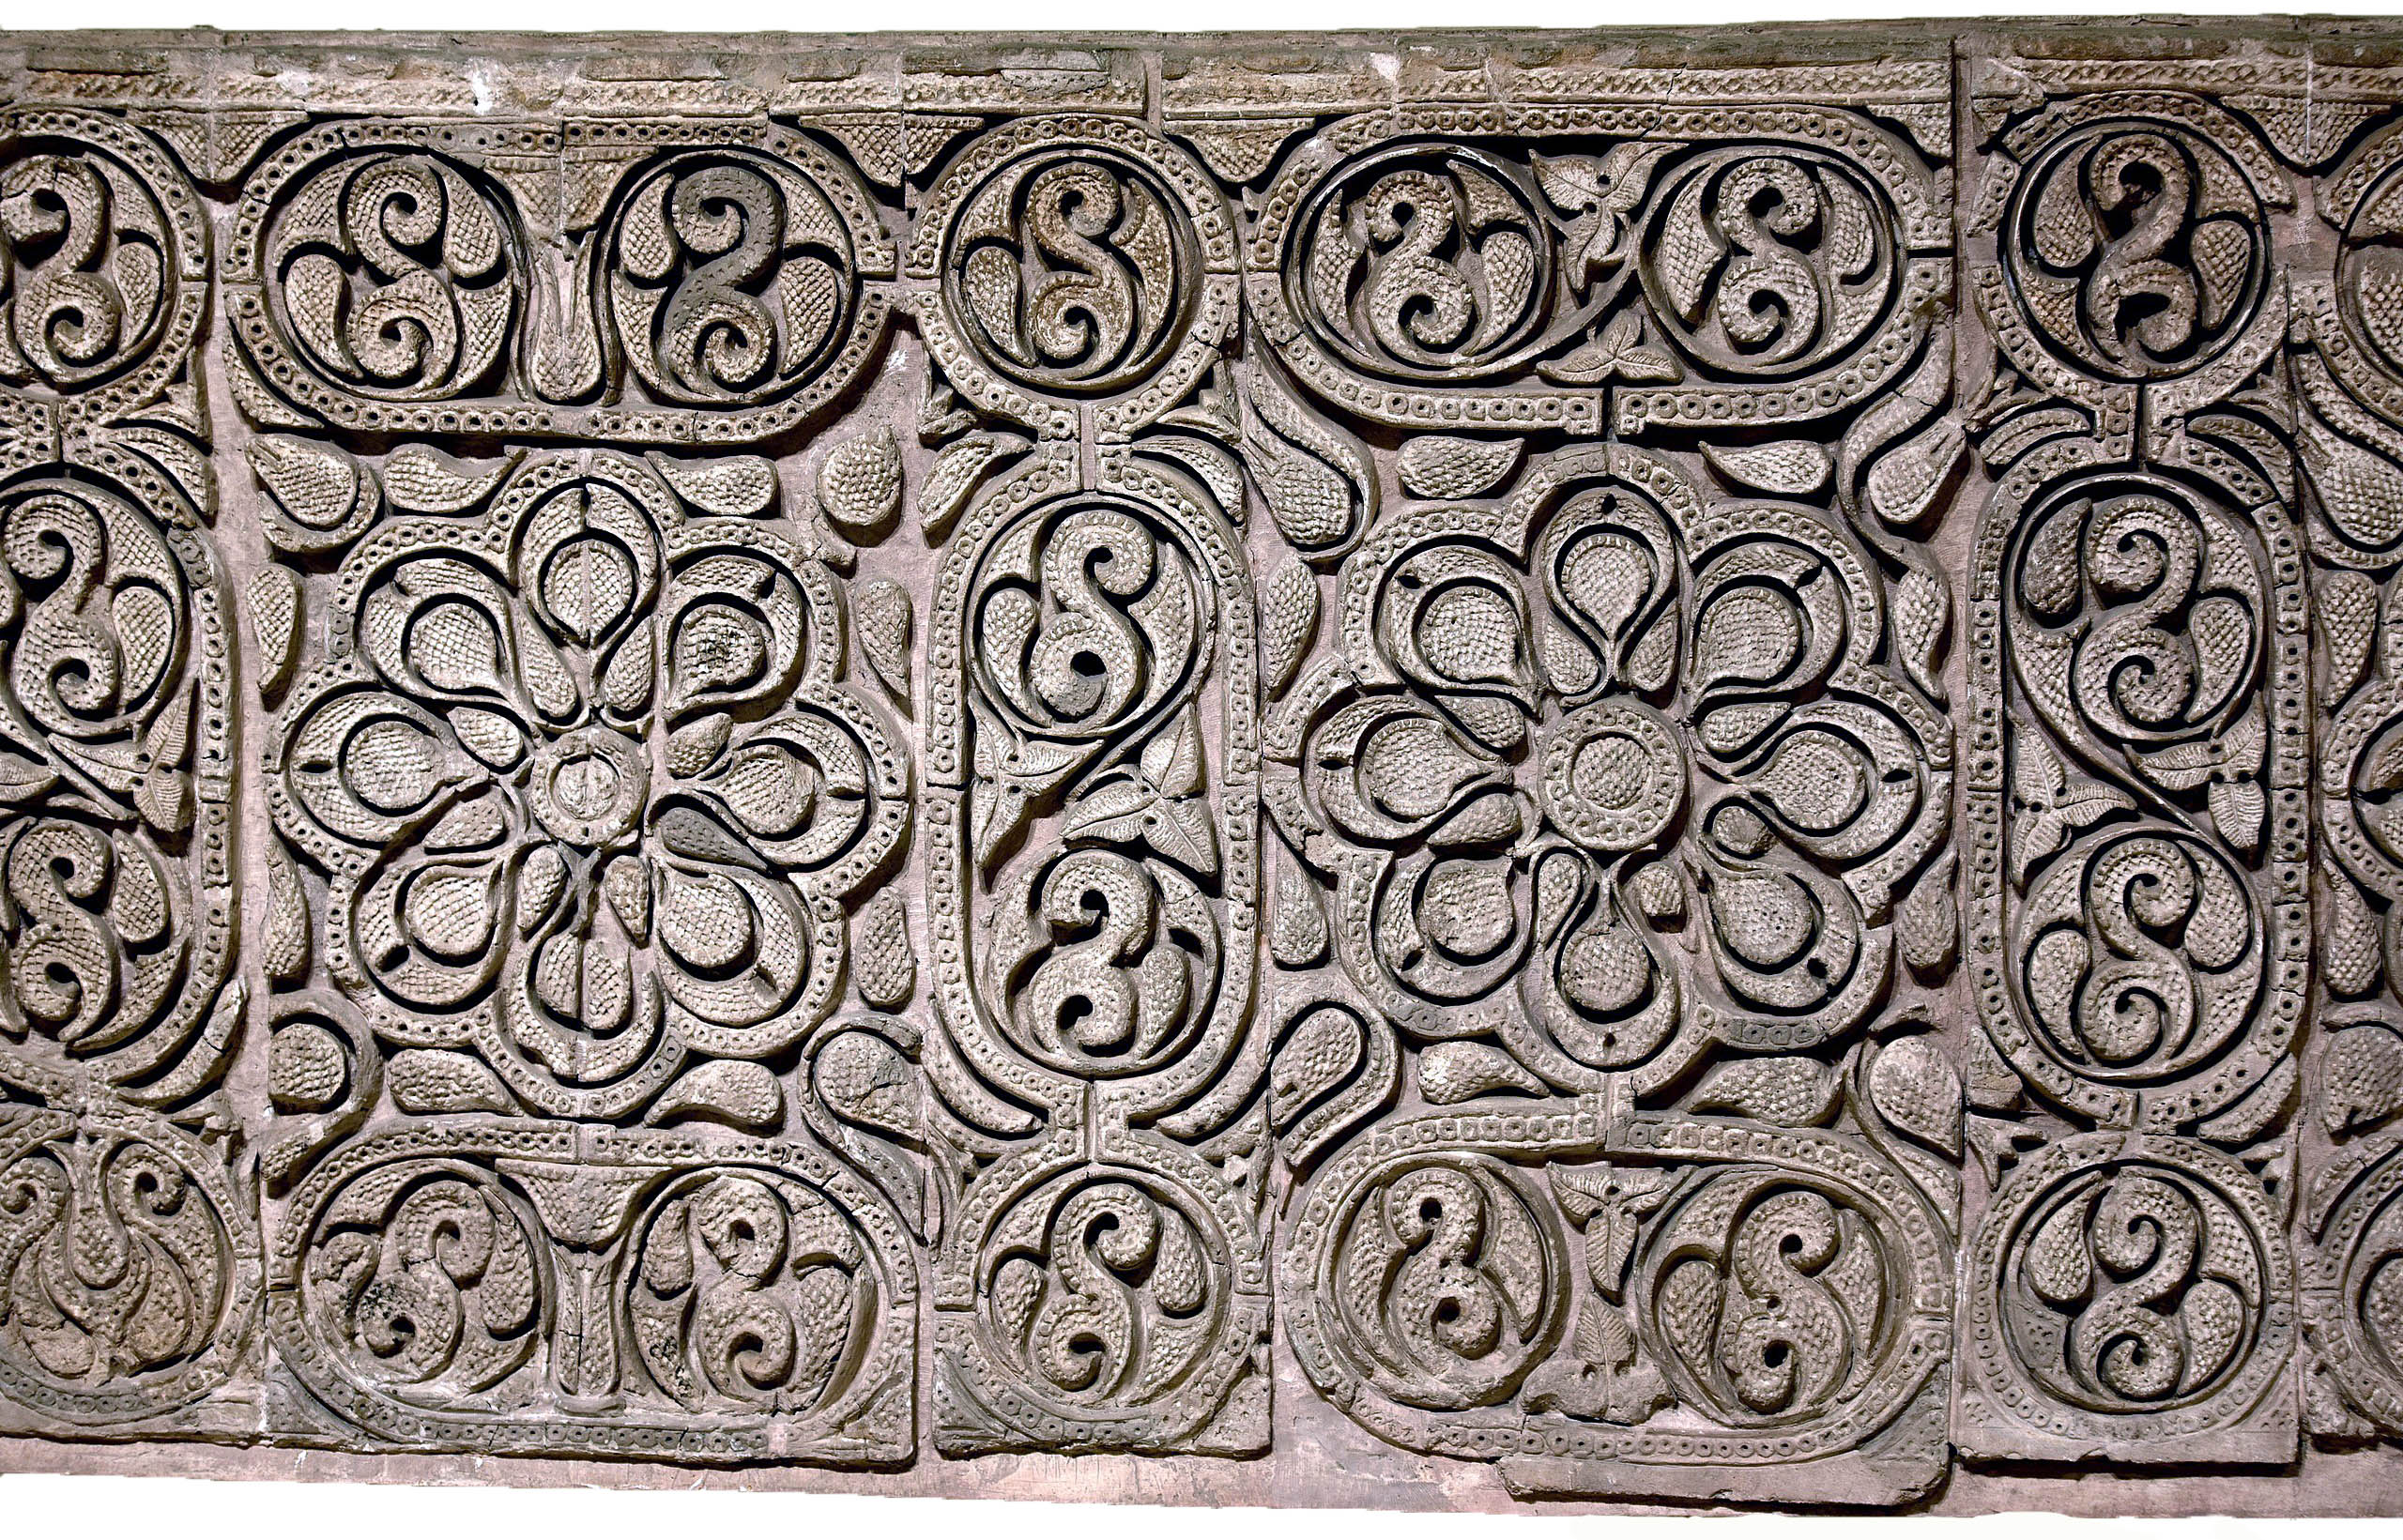 Carved stucco panel from the city of Samarra, Iraq. Floral pattern with geometric designs, grapes, vines, and ears of pine cones. 3rd century AH (9th century CE). On display at the Iraq Museum in Baghdad. (photo: Osama Shukir Muhammed Amin FRCP(Glasg), CC BY-SA 4.0)